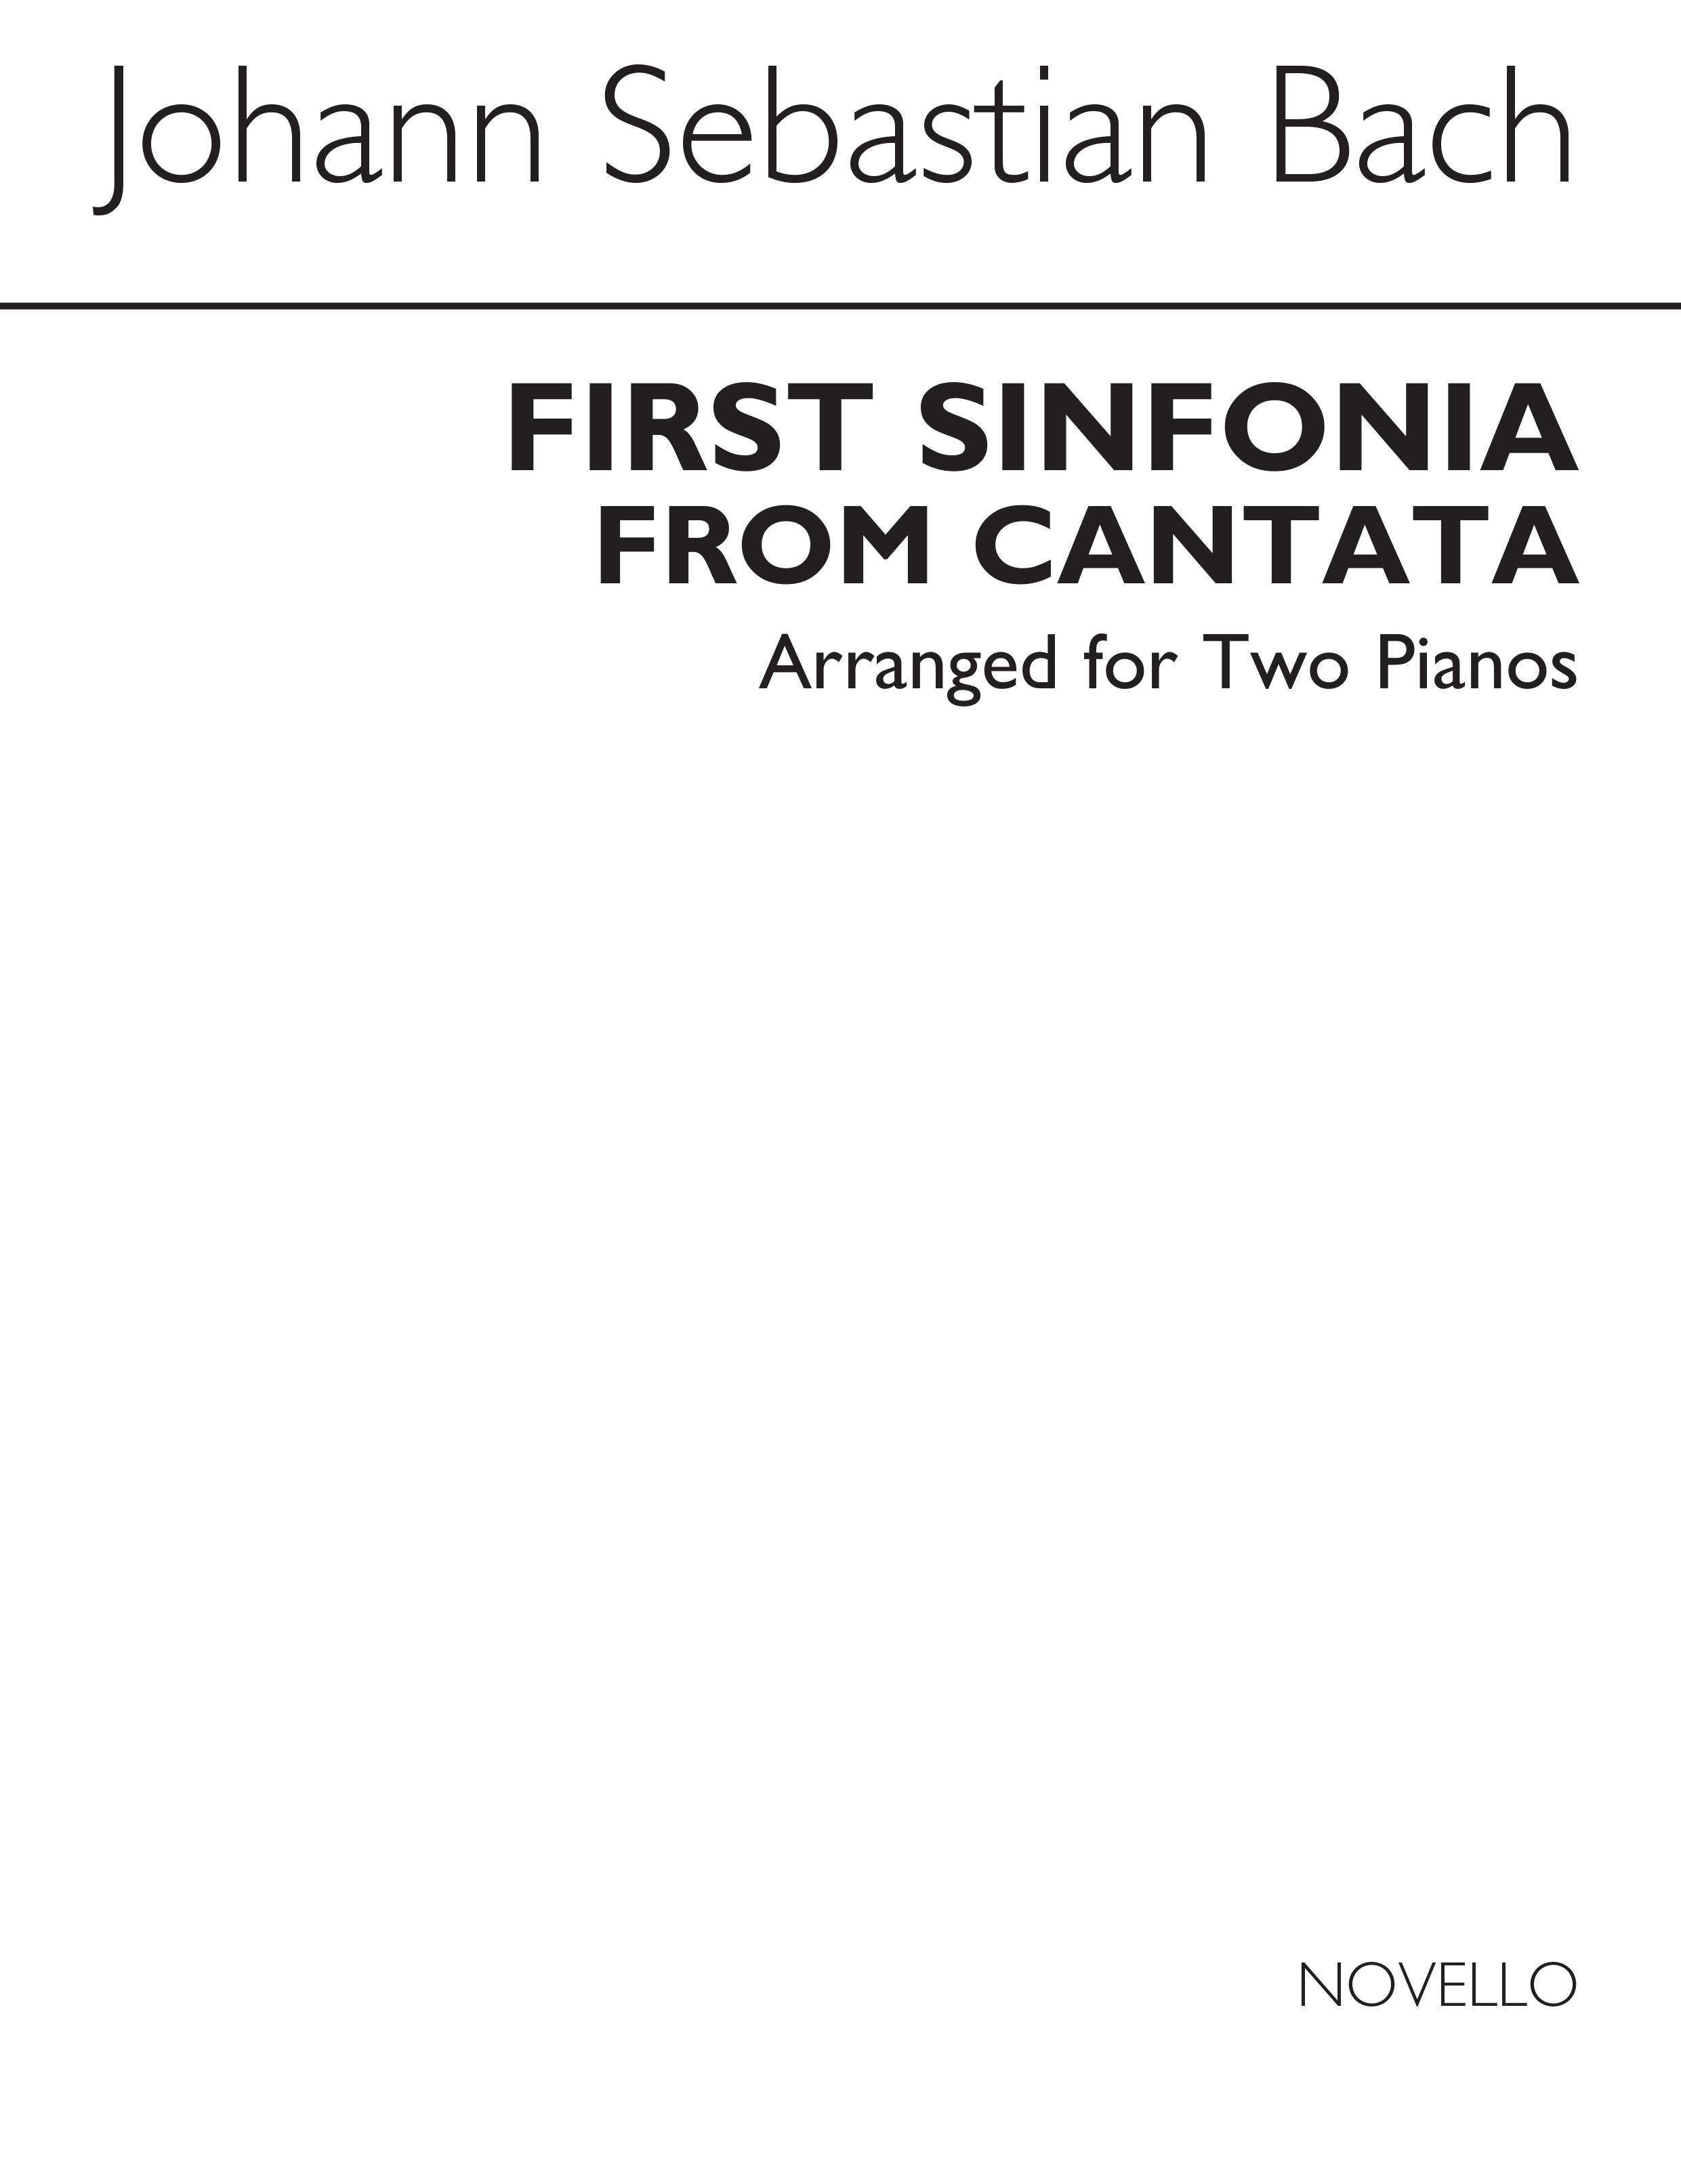 J.S.Bach: First Sinfonia From Cantata 35 (Walter Emery)